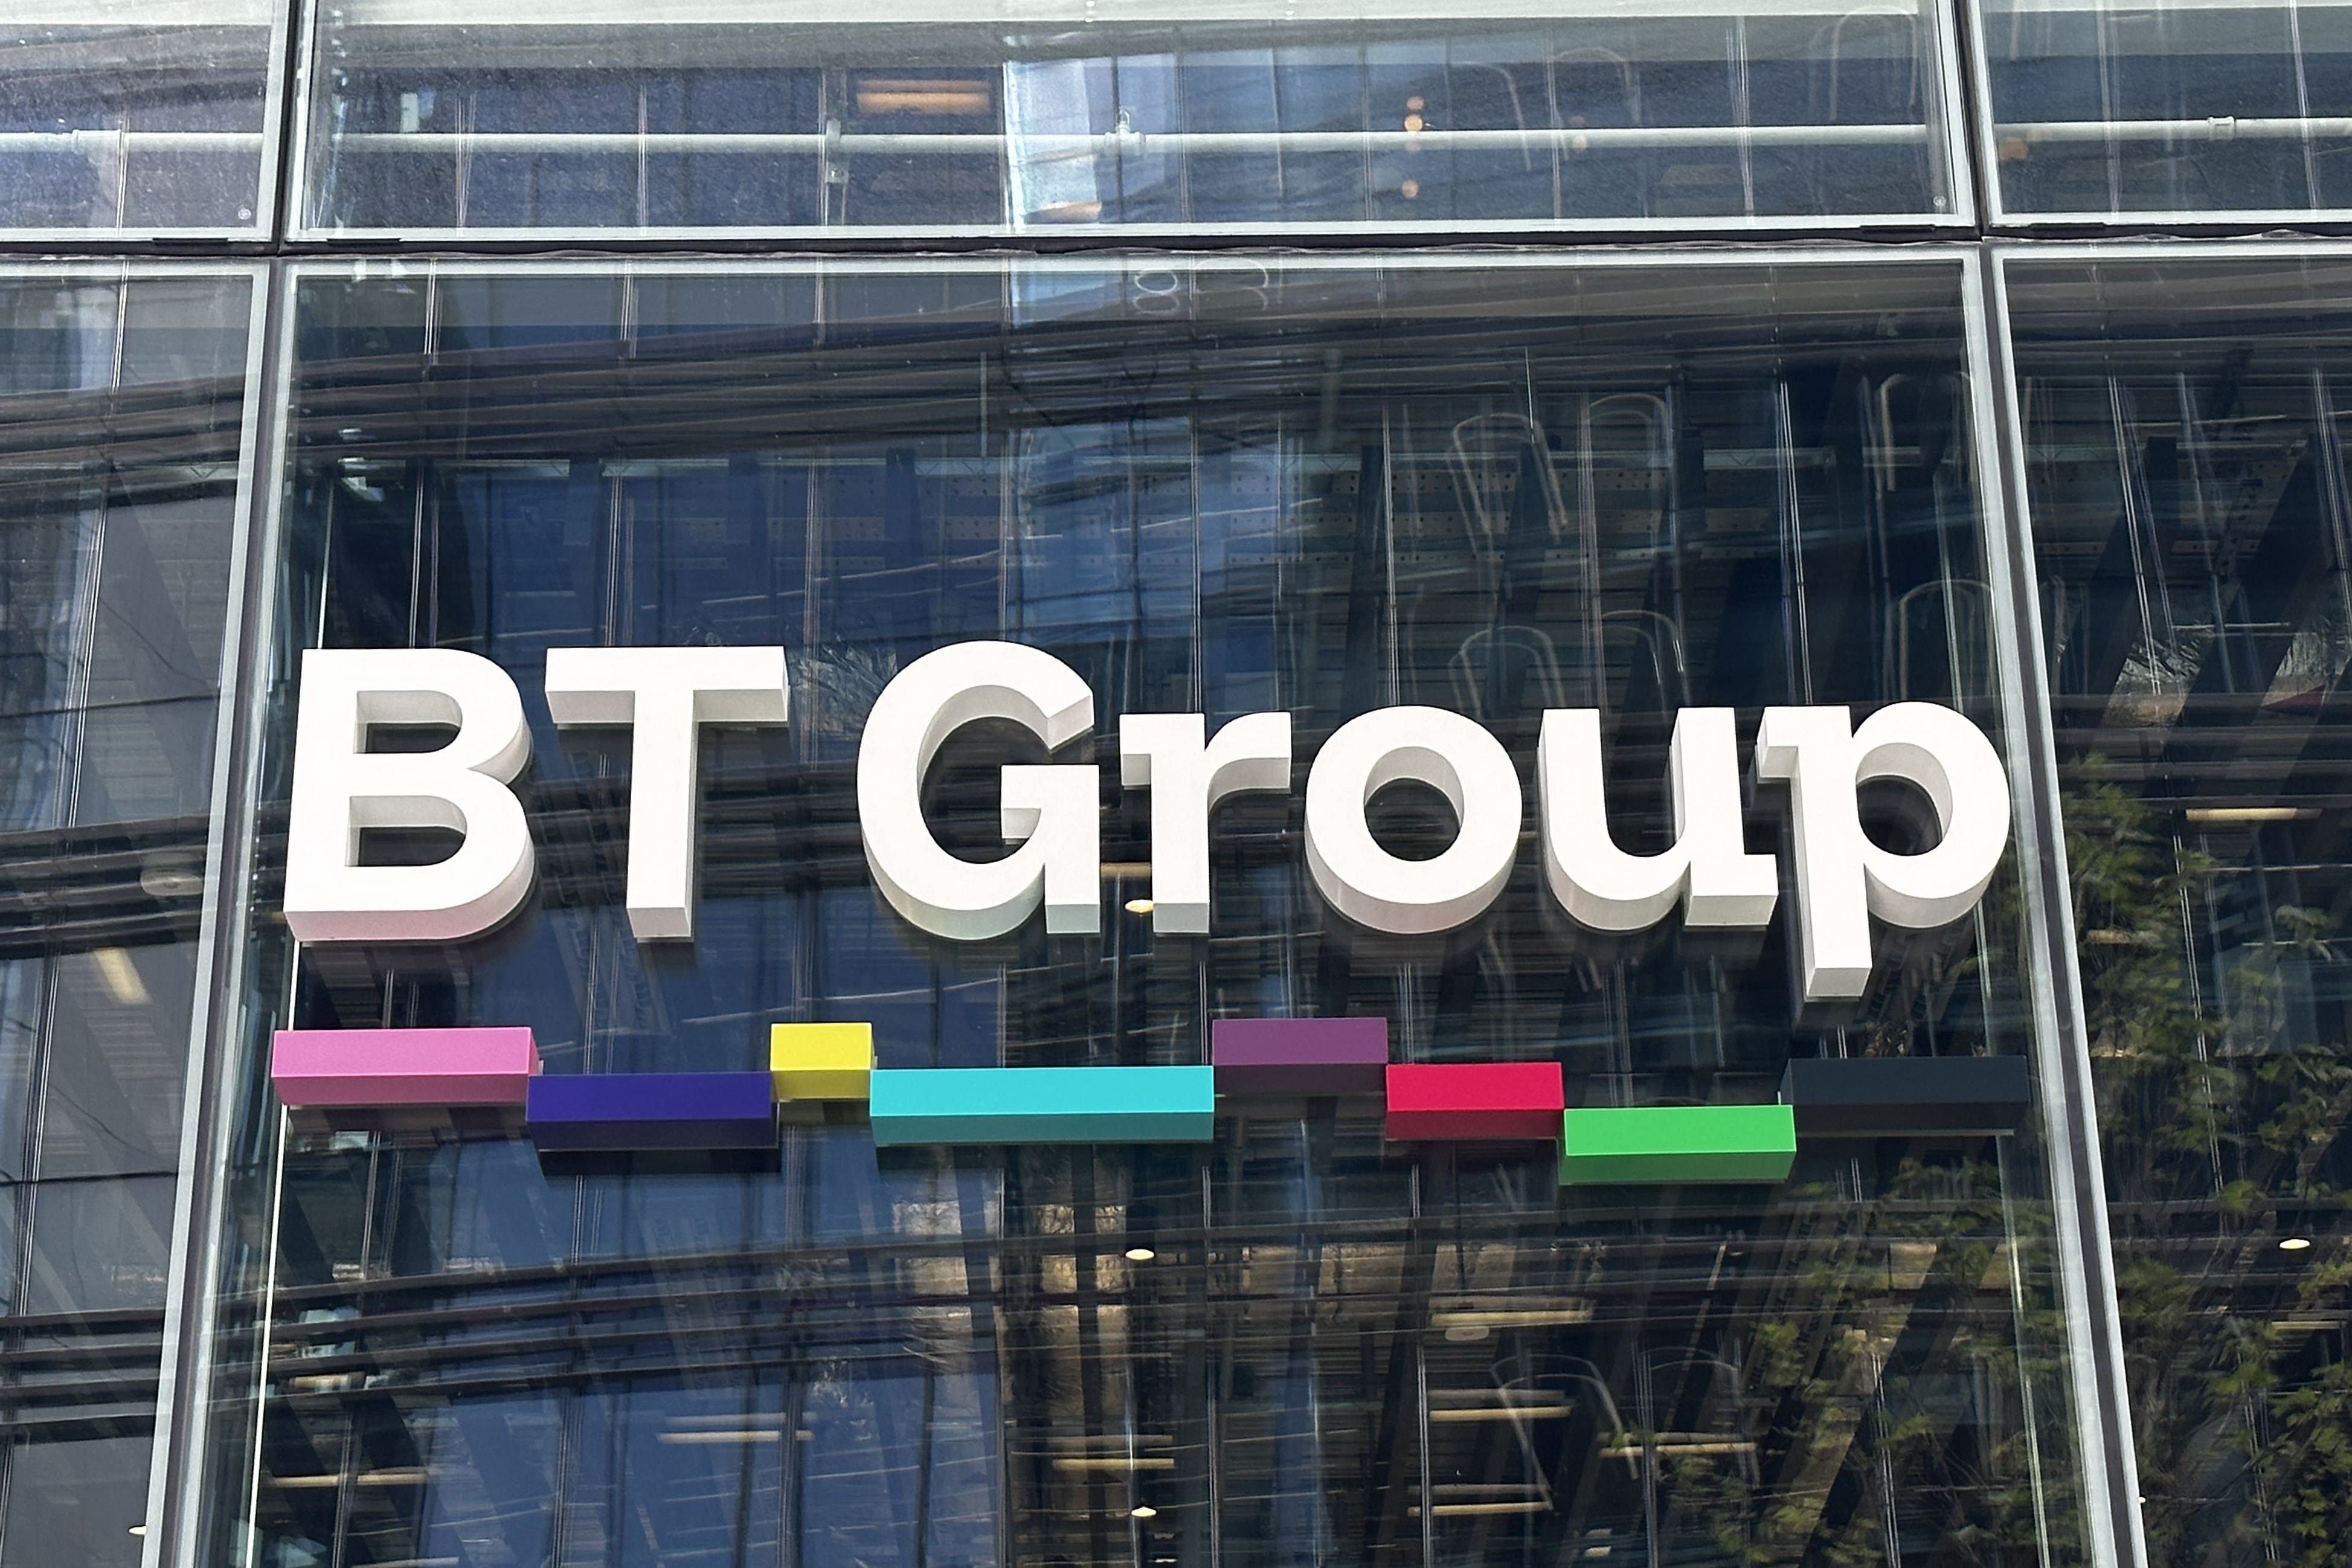 BT CEO says advanced AI is a key part of the company’s technological transformation plans